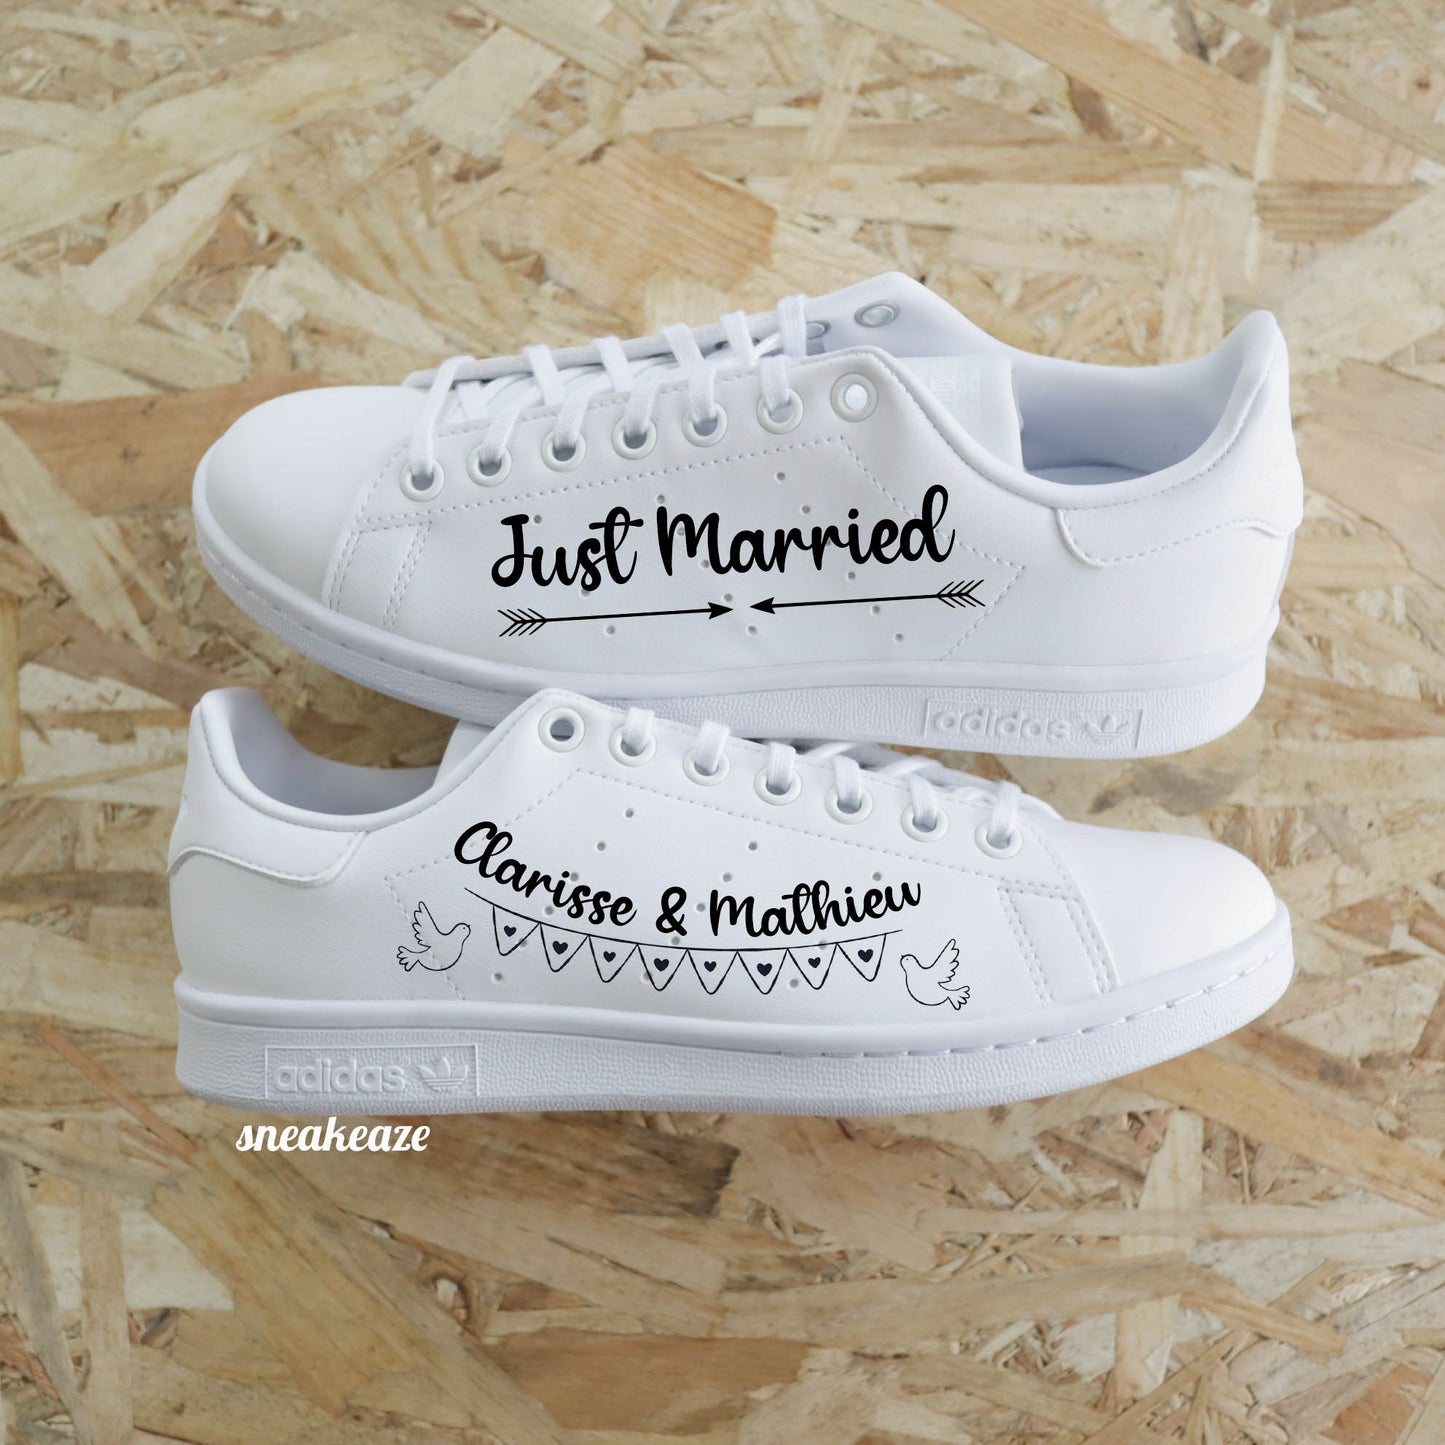 Just Married - Stan Smith custom